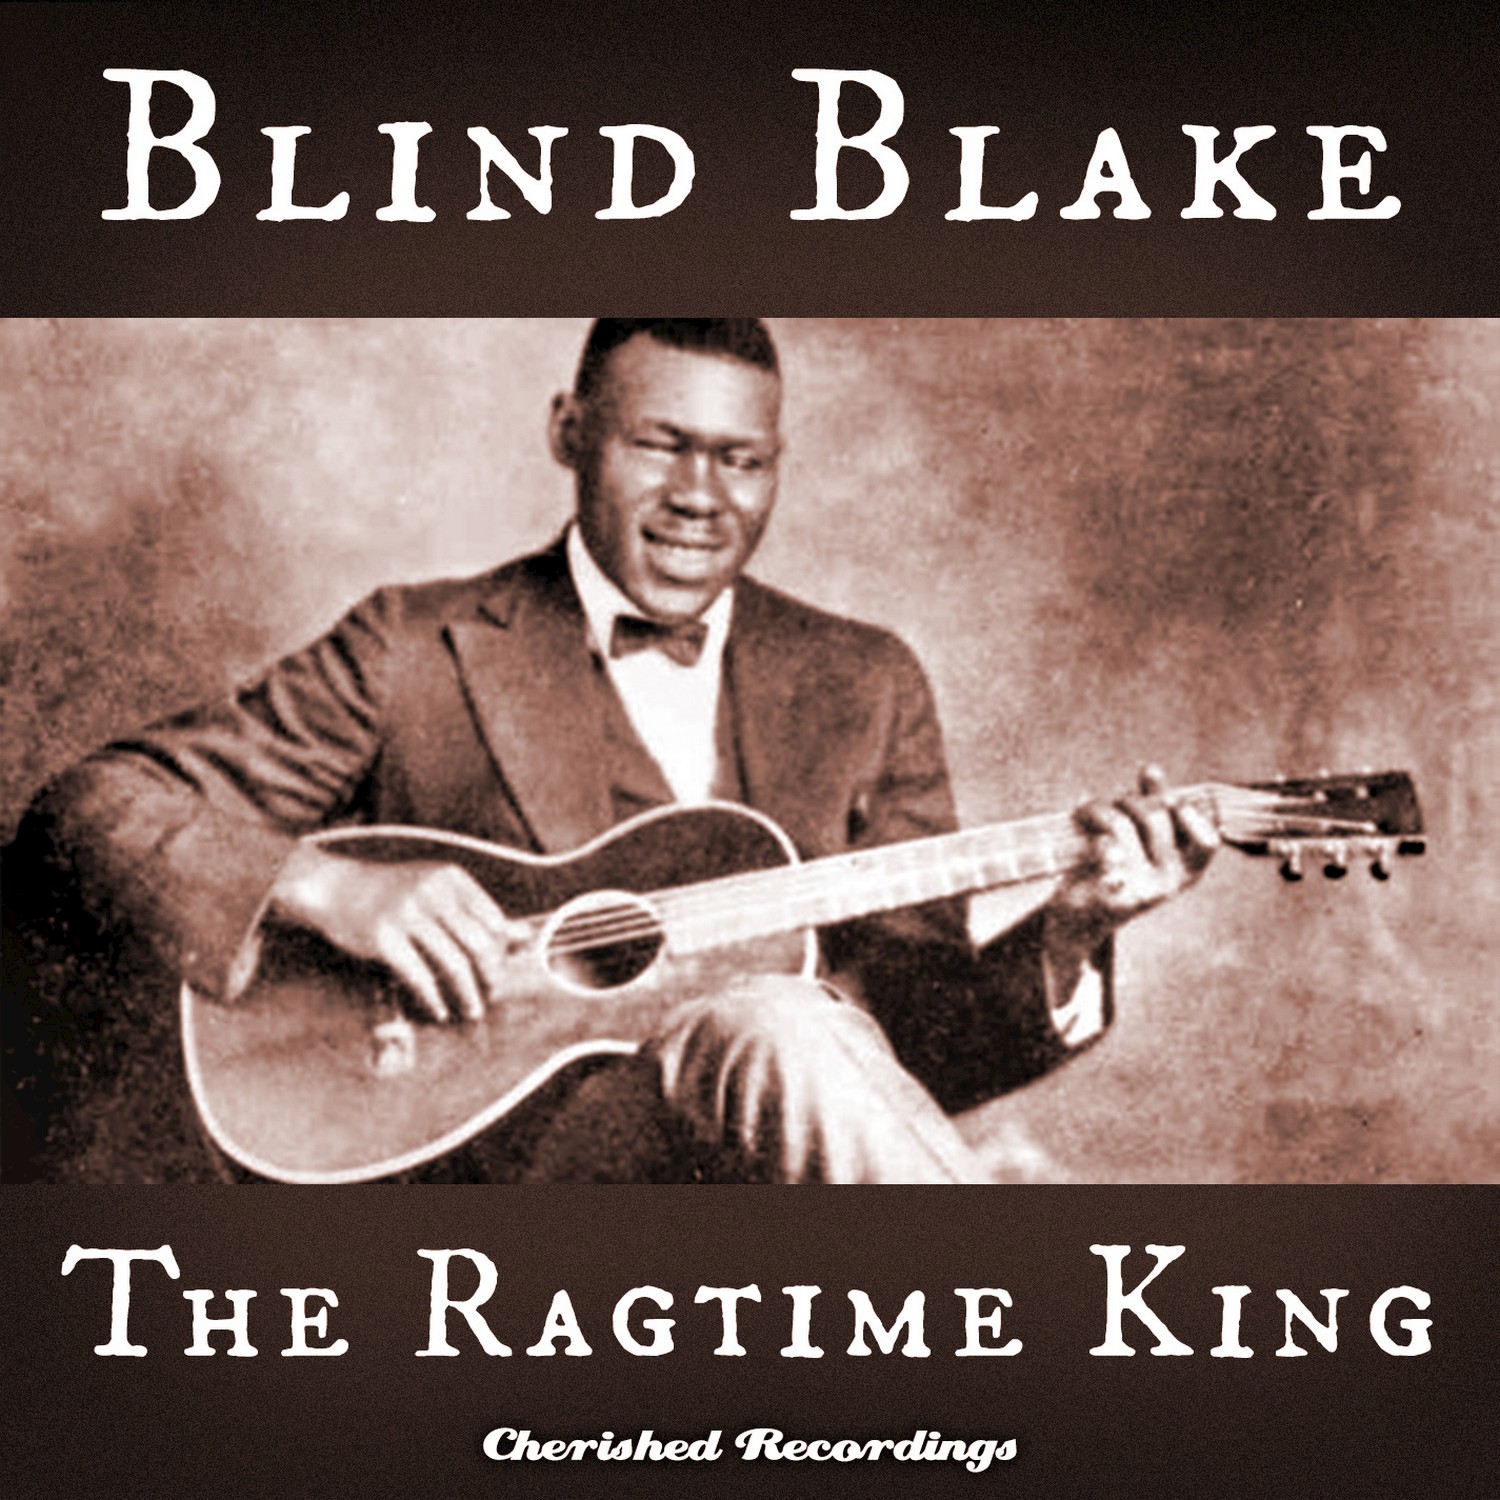 The Ragtime King